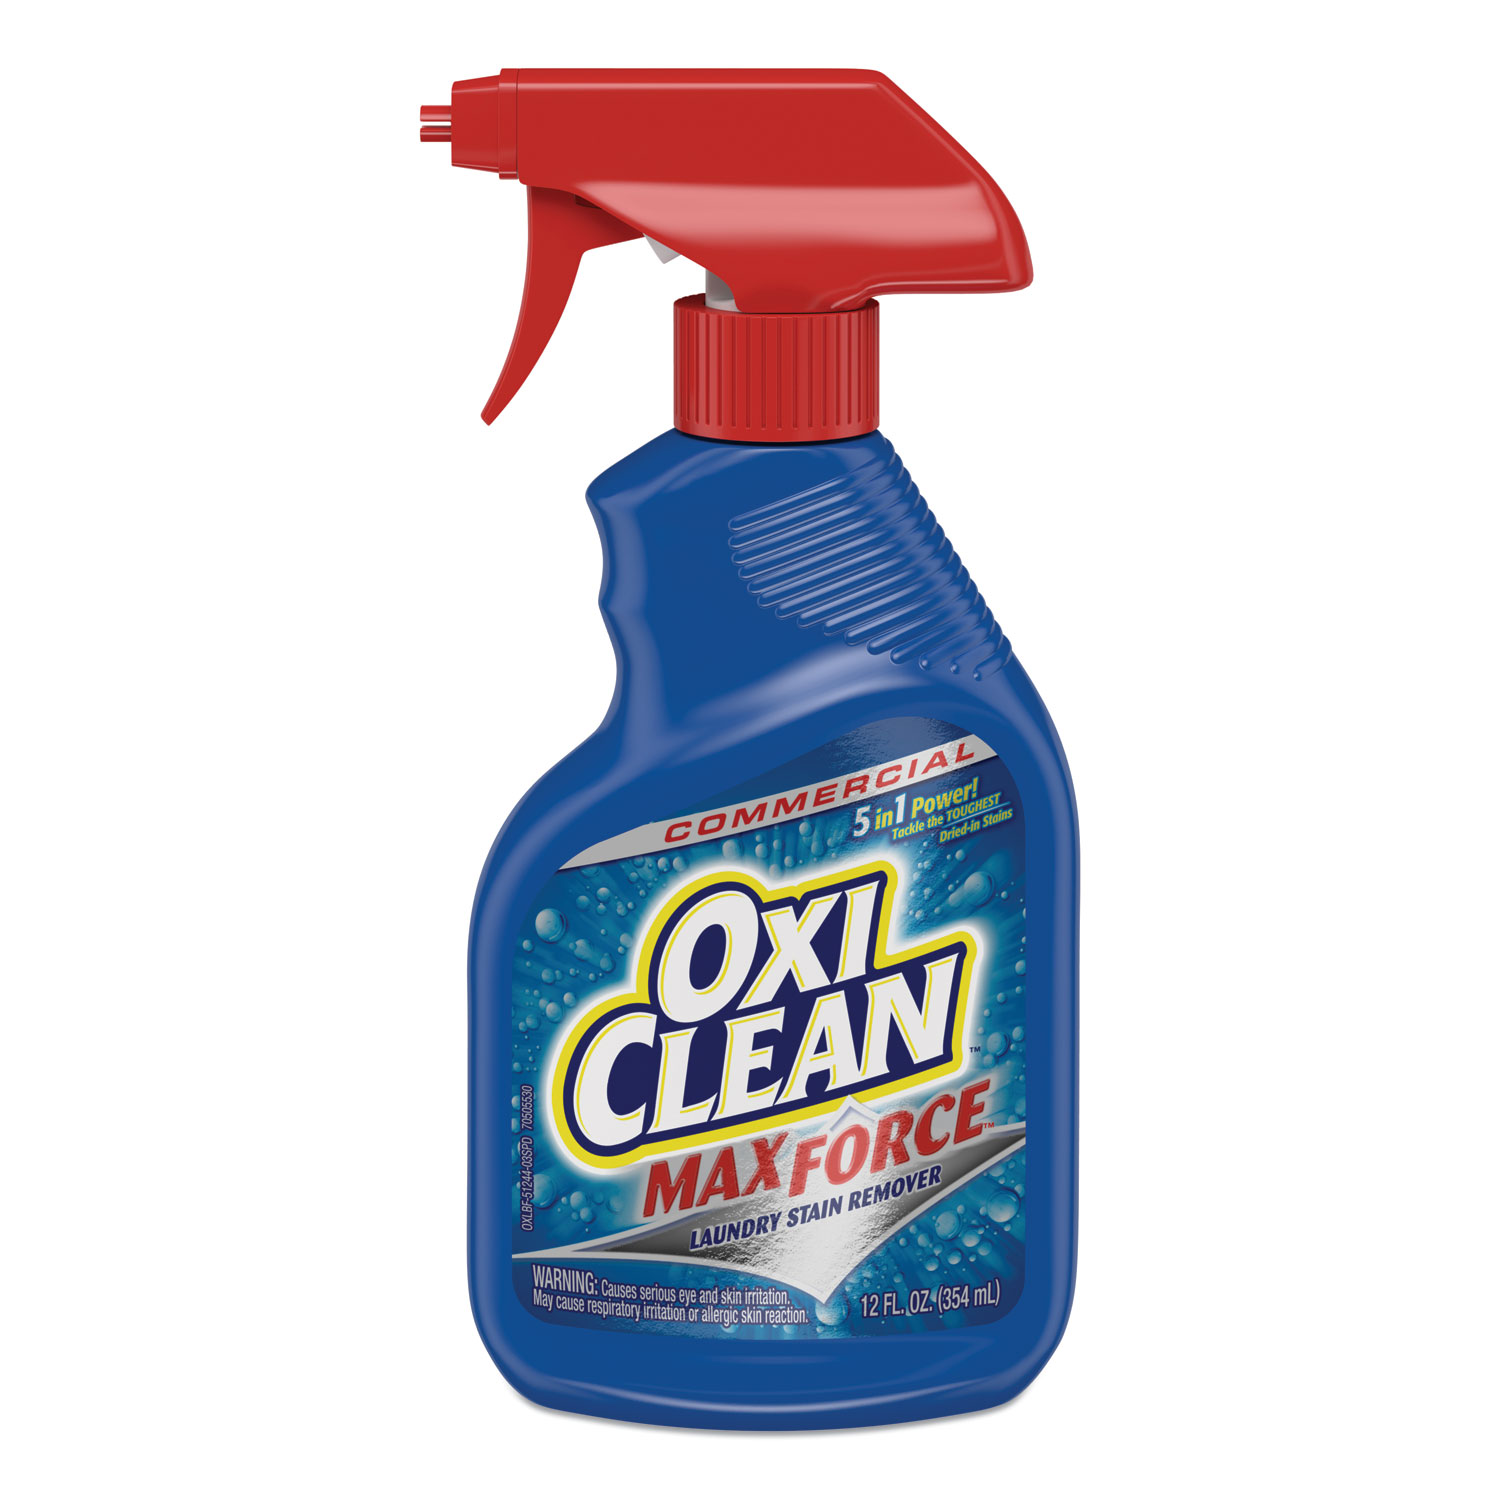  OxiClean 57037-00070 Max Force Laundry Stain Remover, 12oz Spray Bottle (CDC5703700070EA) 